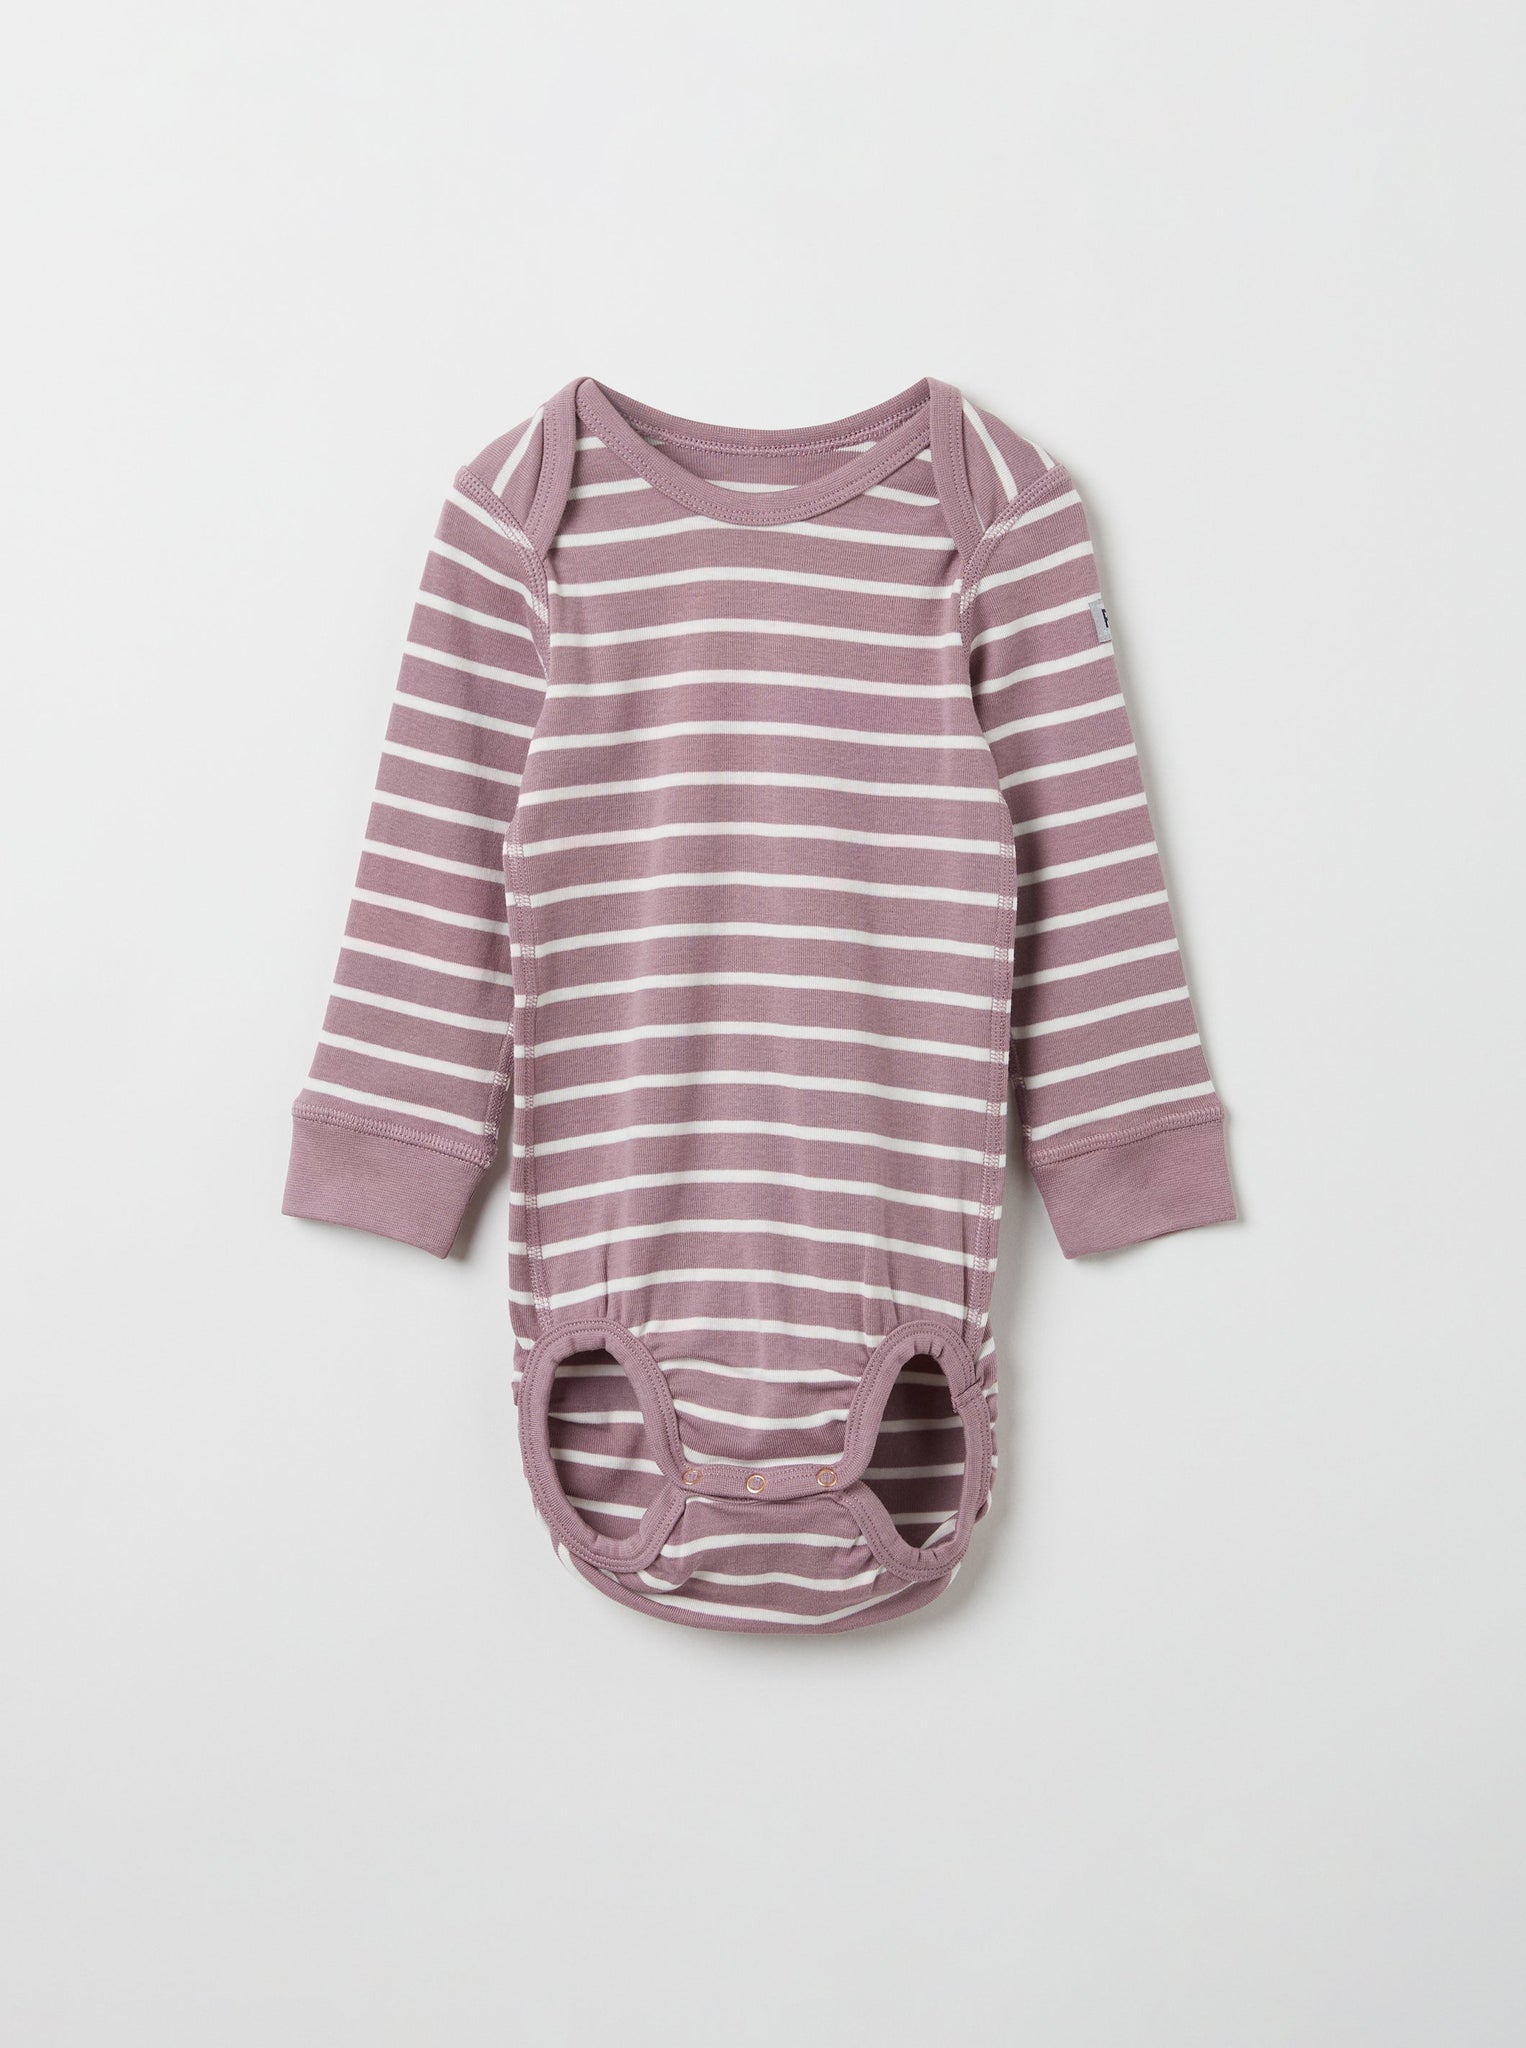 Striped Organic Cotton Purple Babygrow from the Polarn O. Pyret babywear collection. Clothes made using sustainably sourced materials.